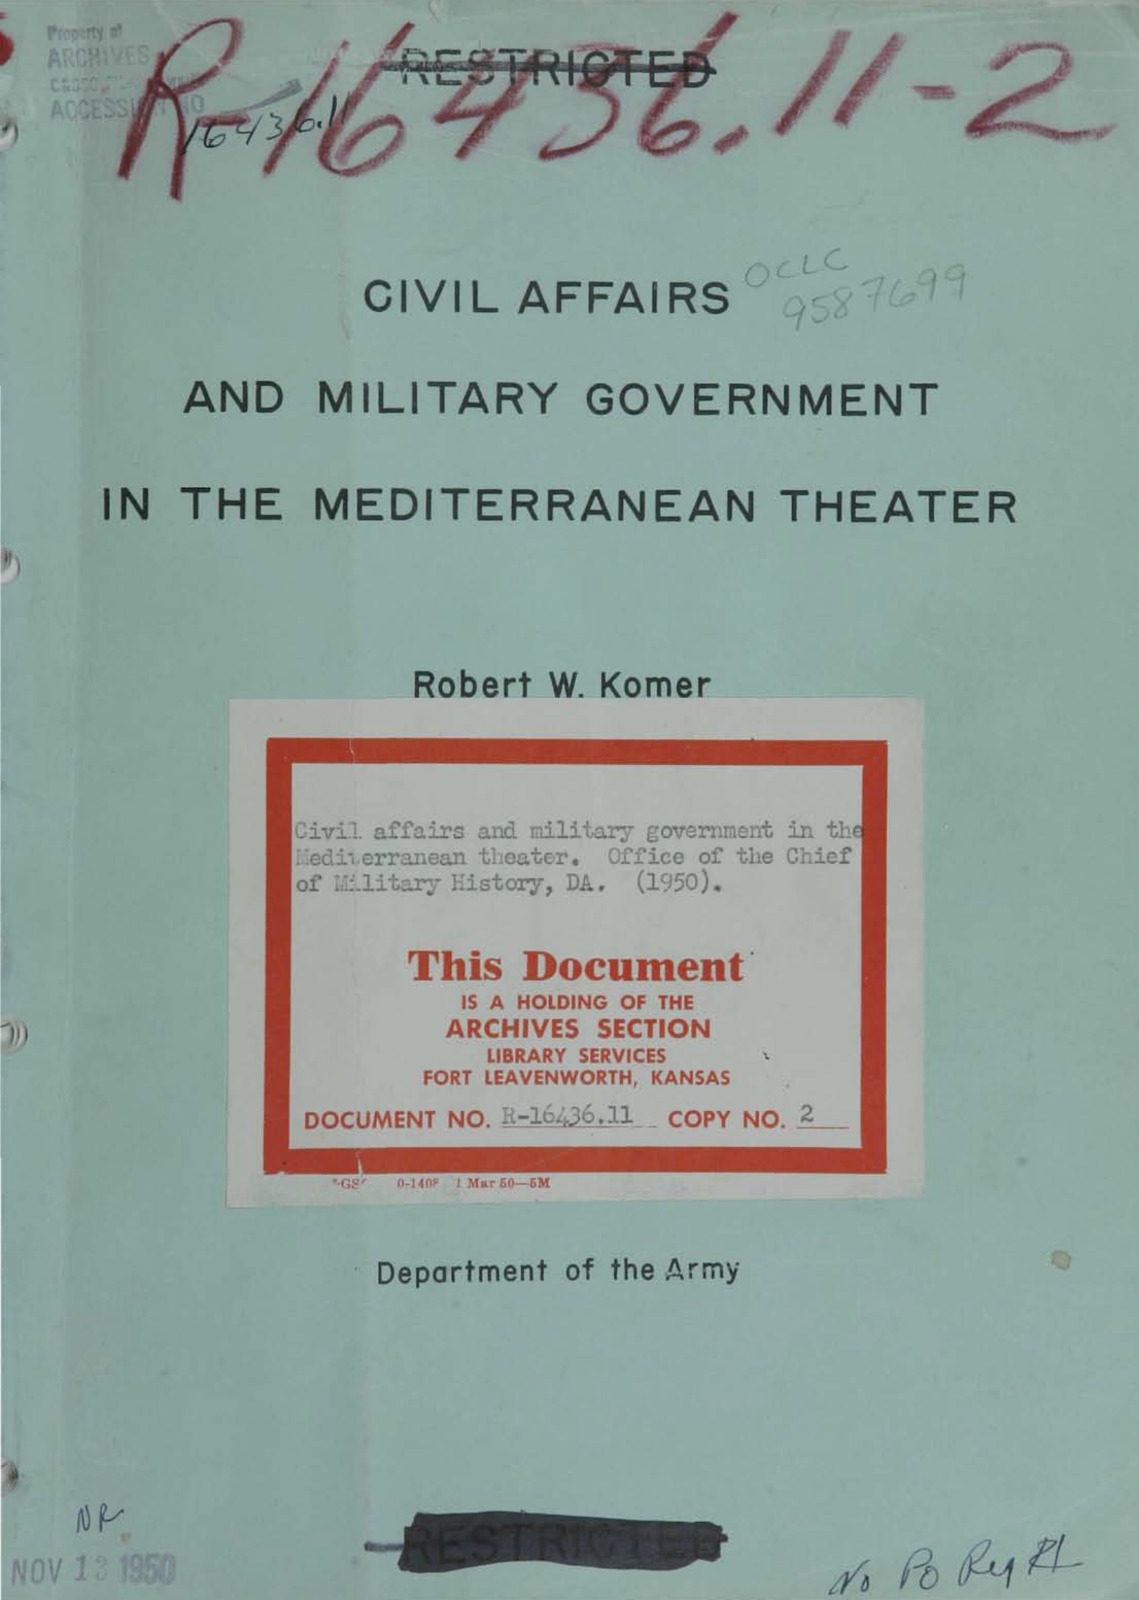 951 pg. Civil Affairs Military Government Mediterranean Theater Italy on Data CD